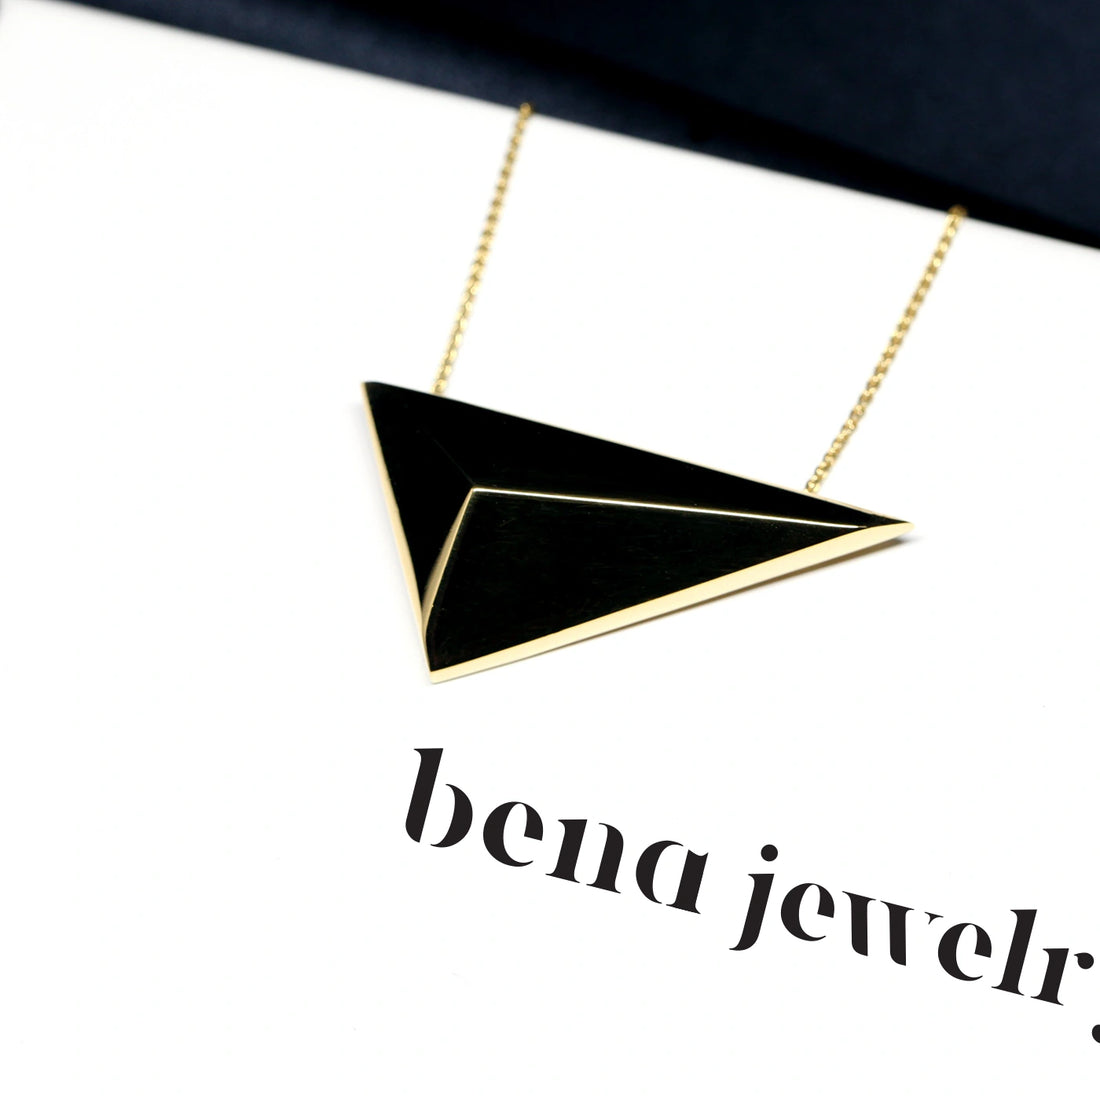 Dark pendant bena jewelry vermeil gold jewelry silver yellow gold plated pike jewelry montreal made in canada